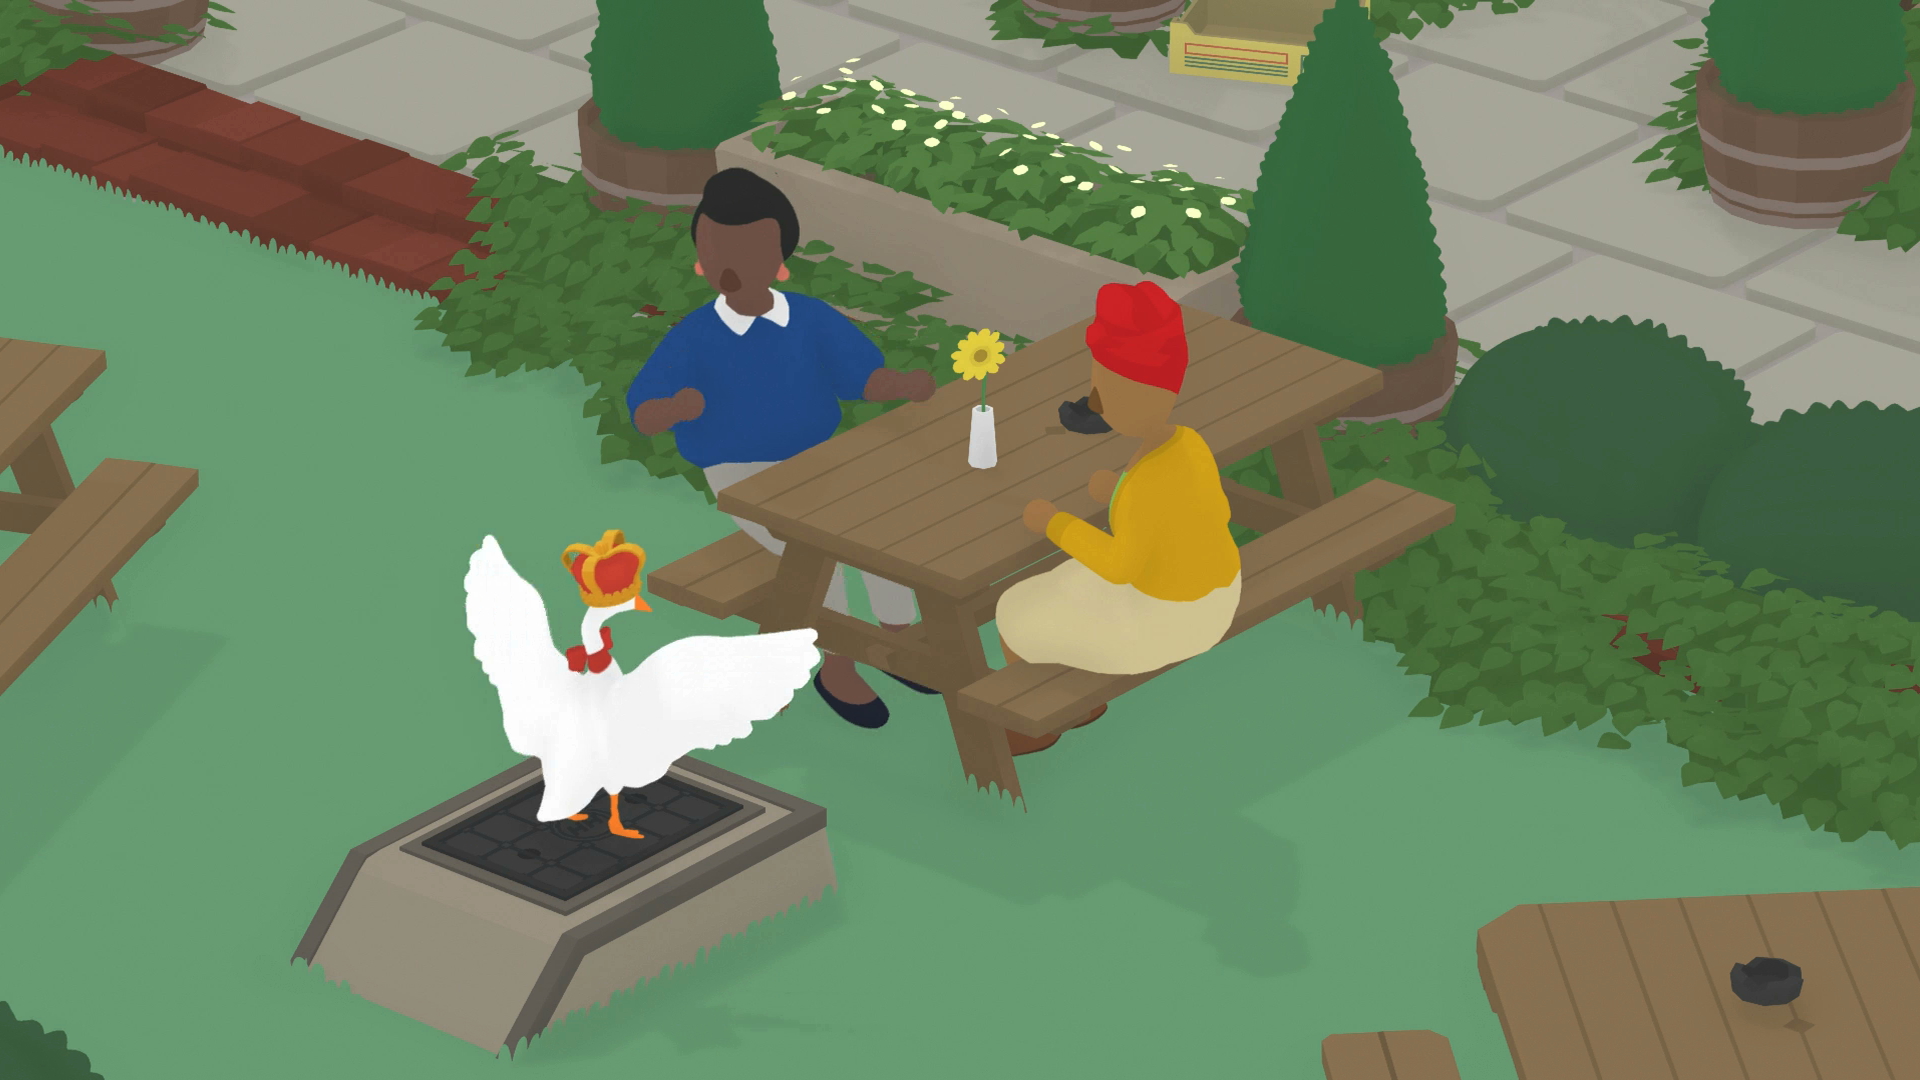 Make double the trouble in Untitled Goose Game's upcoming co-op